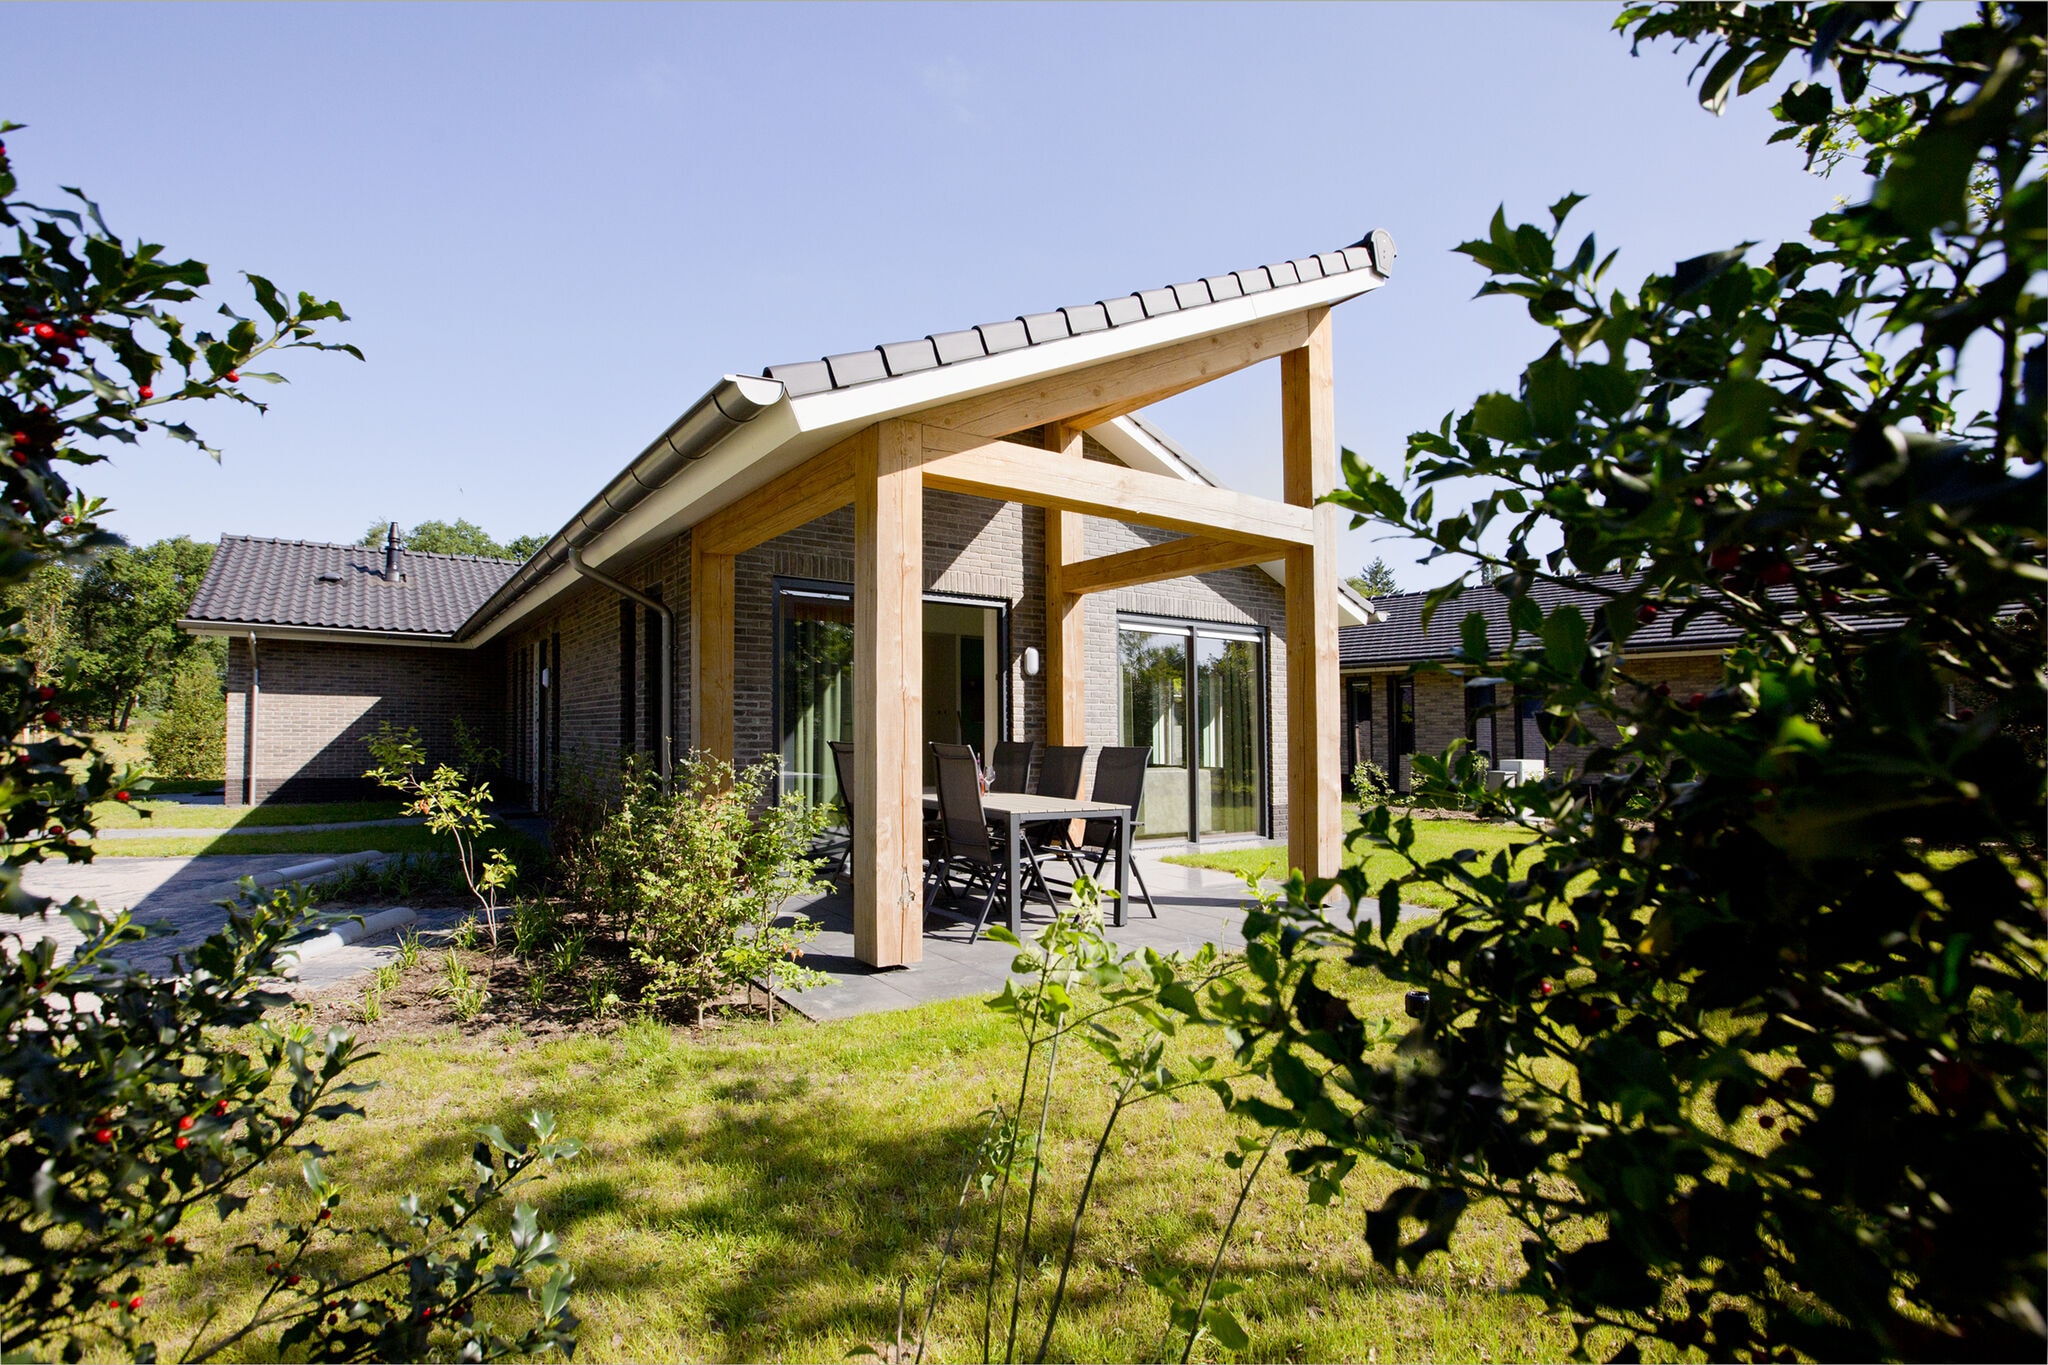 Attractive bungalow near the Veluwe